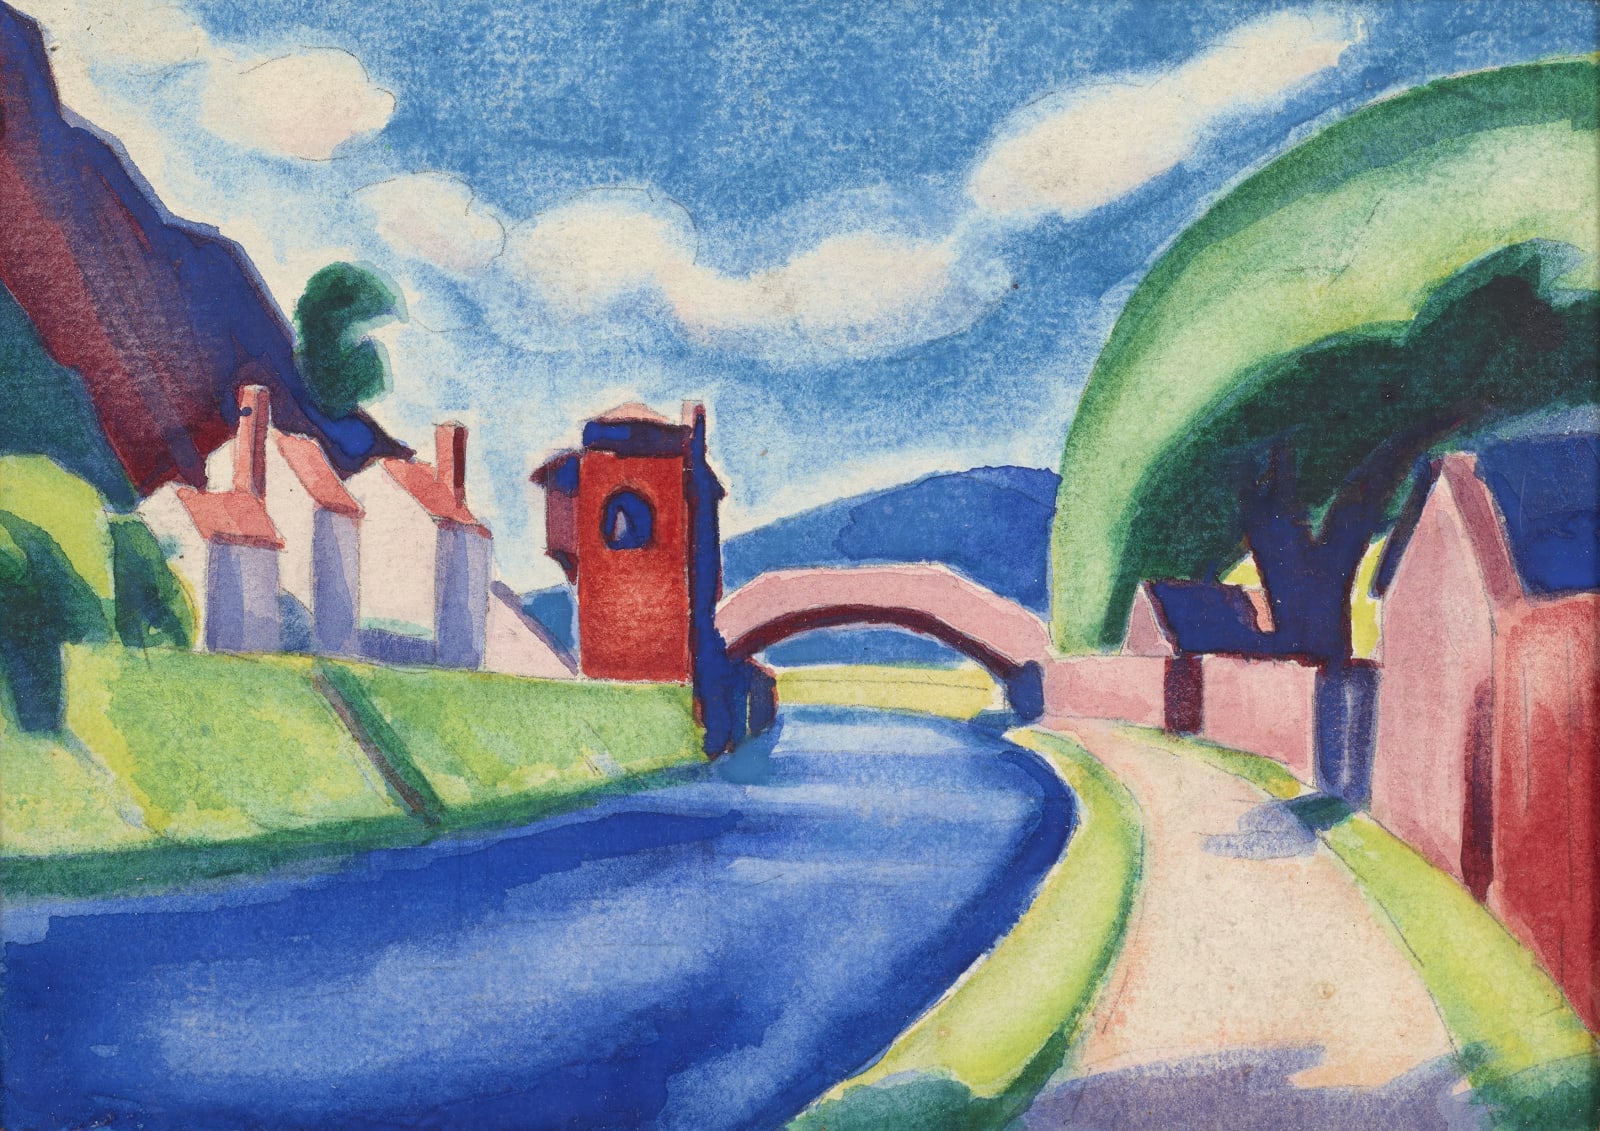 Oscar Bluemner, Canal at DL & W Railroad, Paterson Station, 1914-17